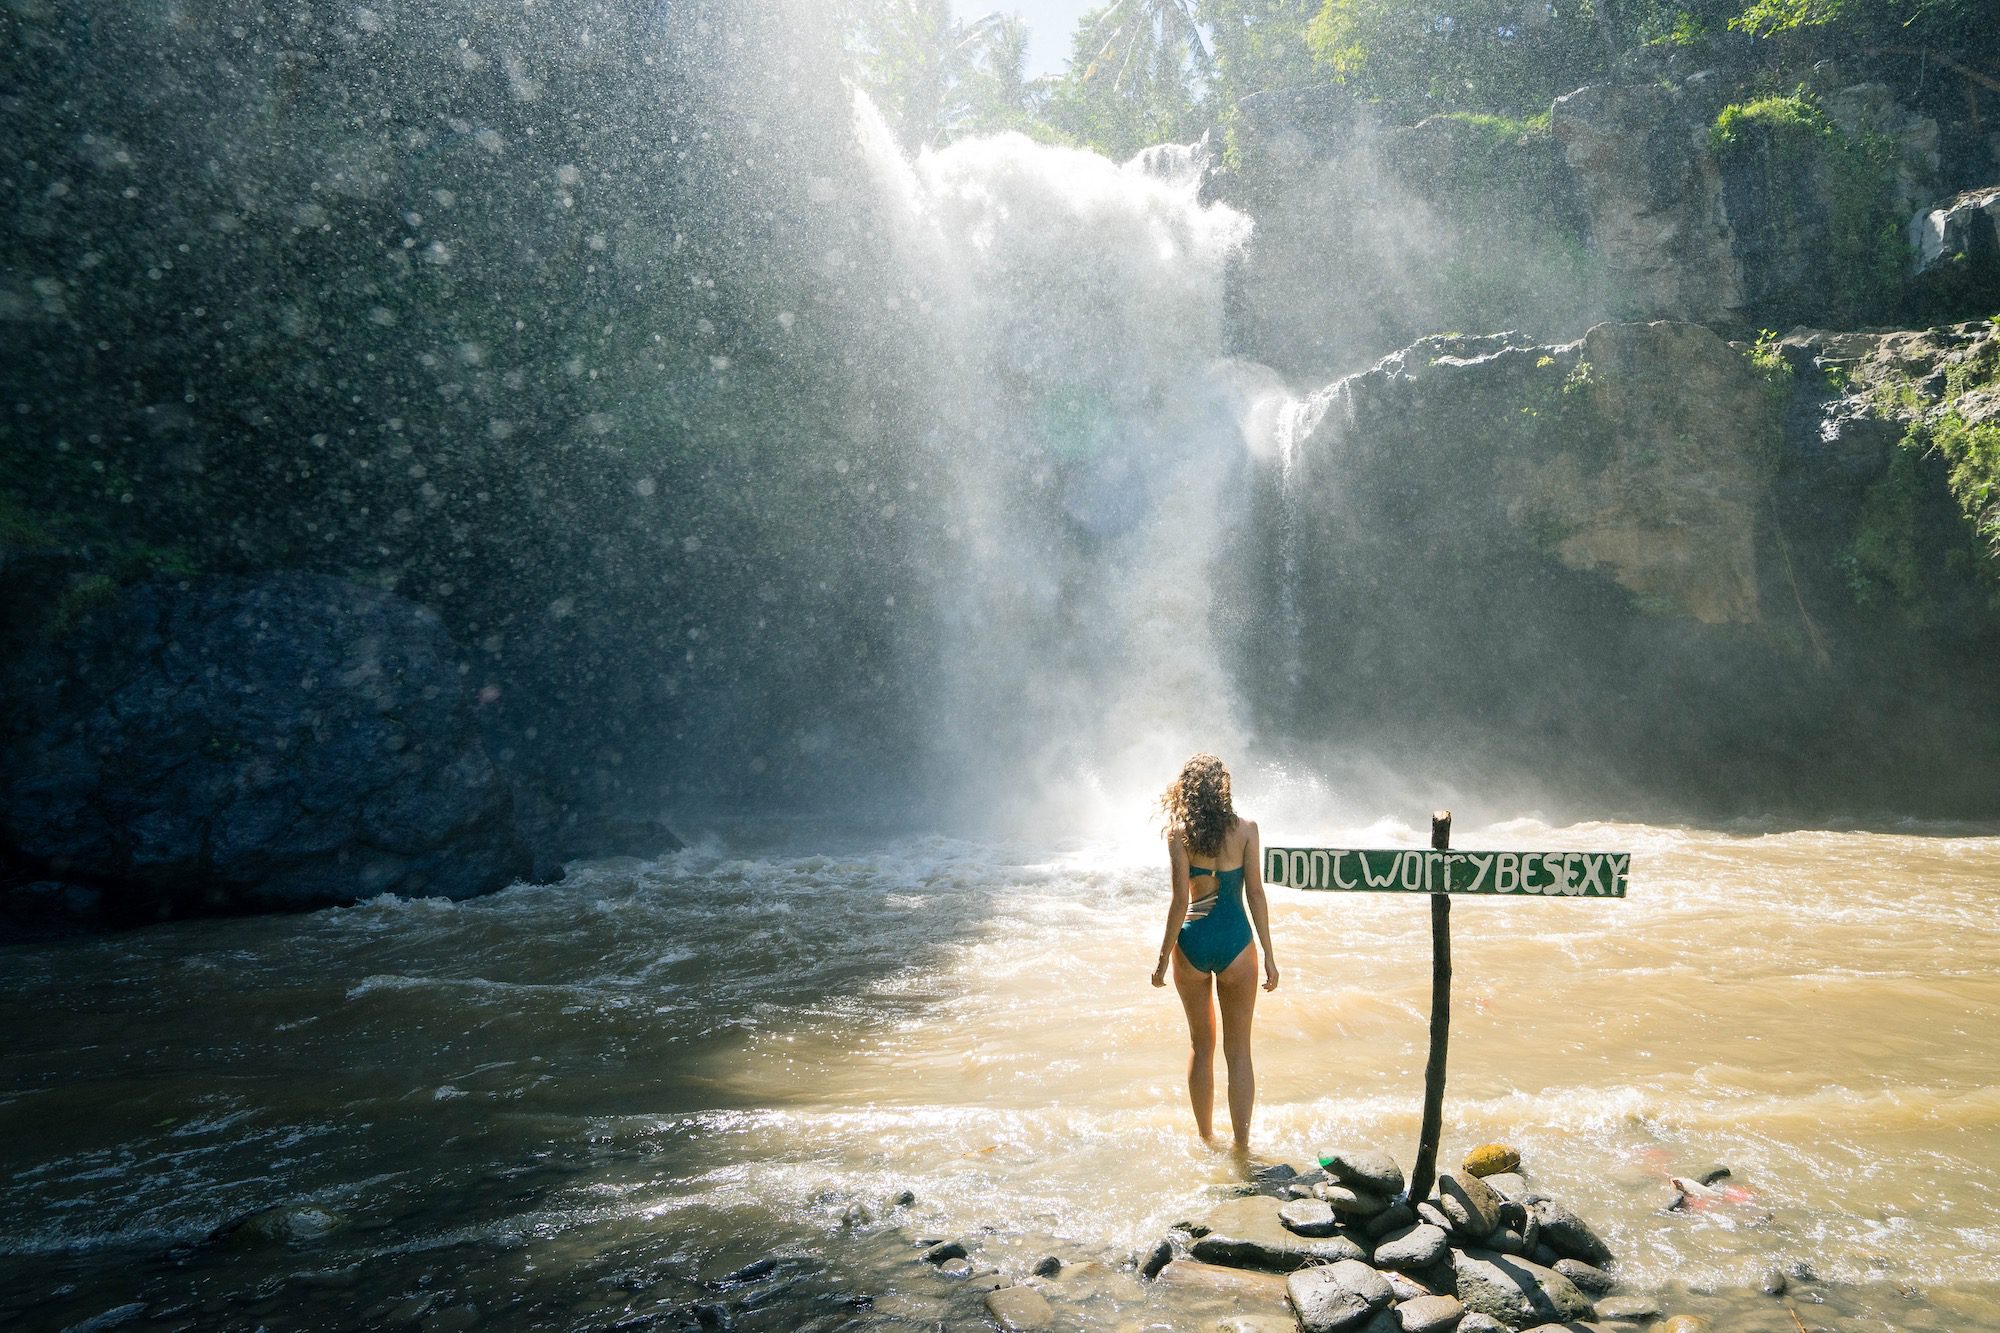 A person stands by a river in front of a majestic waterfall, sunlight filtering through the mist, with a wooden signpost nearby.